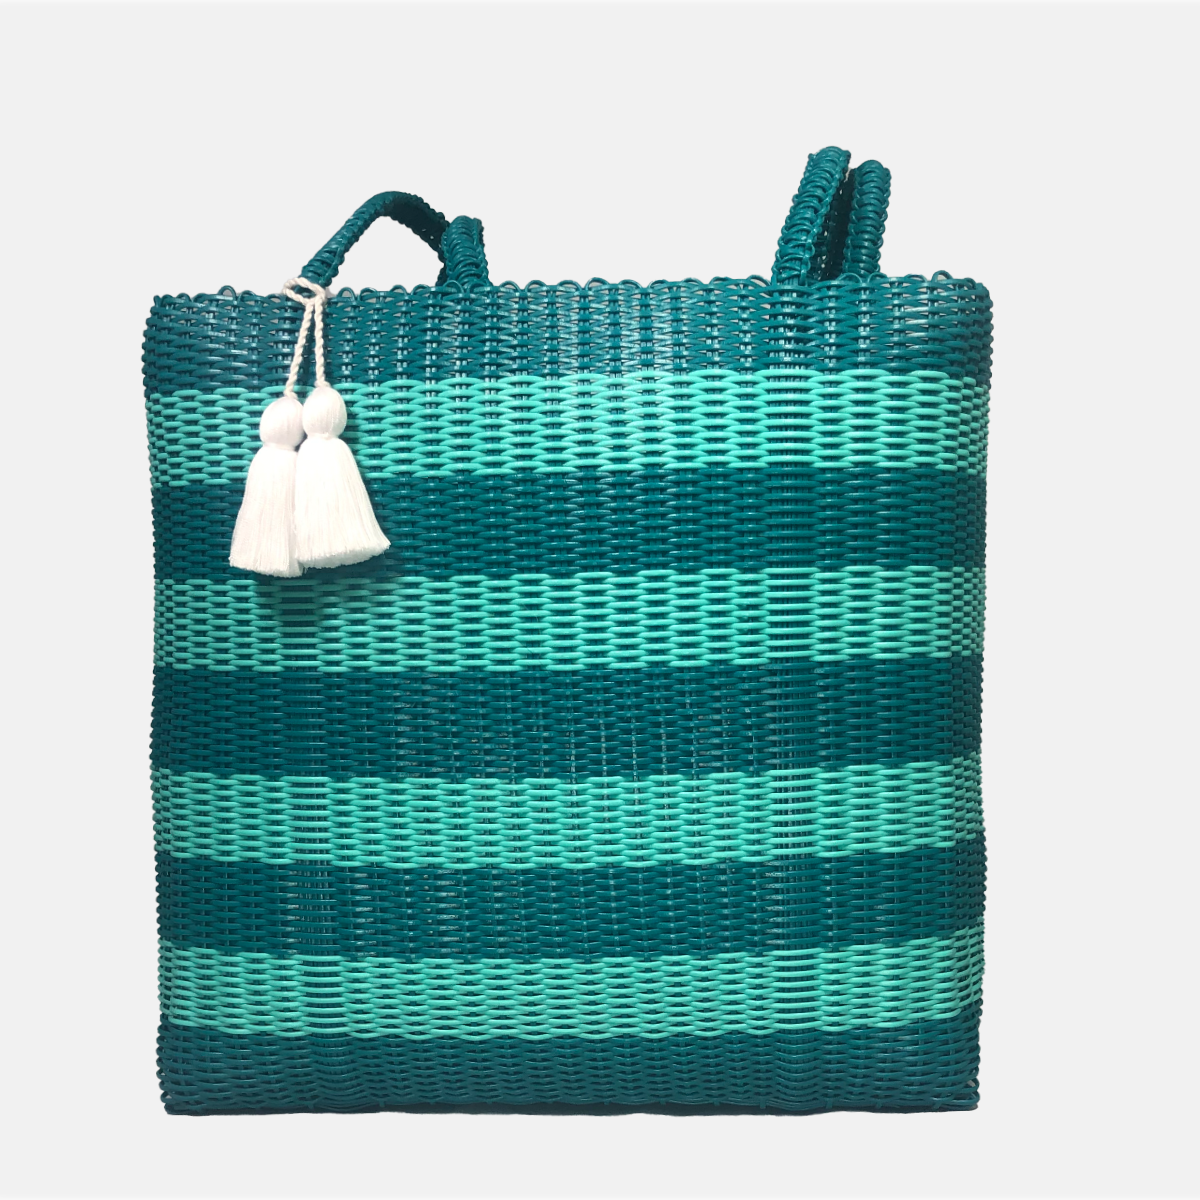 ixoq recycled plastic cesta TOTE ex-large ~ Turquoise & Mint Bags ixöq   